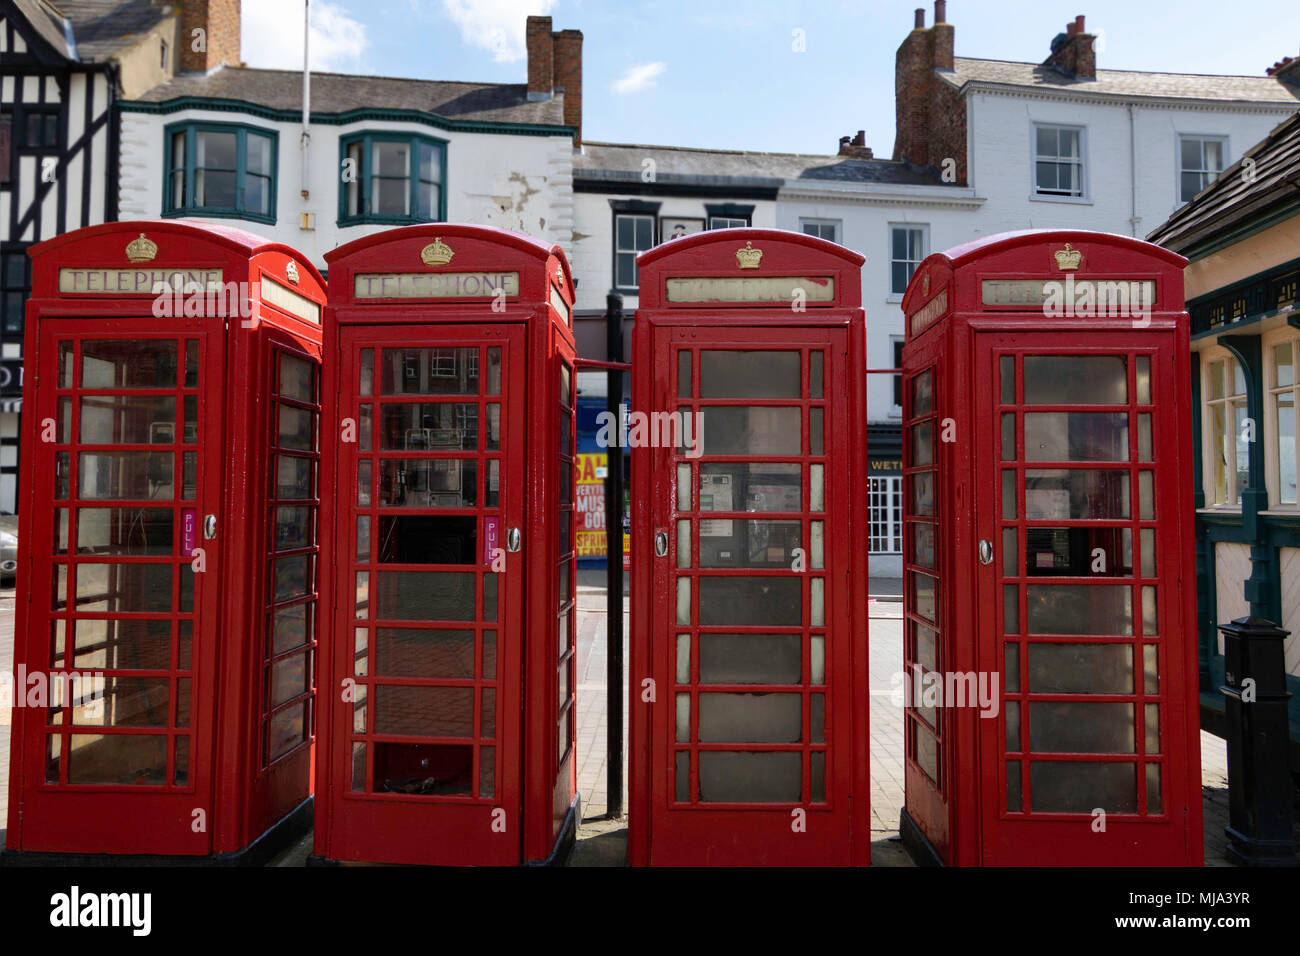 Four Red Telephone Boxes in The Market Square at Ripon, North Yorkshire, England, UK. Stock Photo